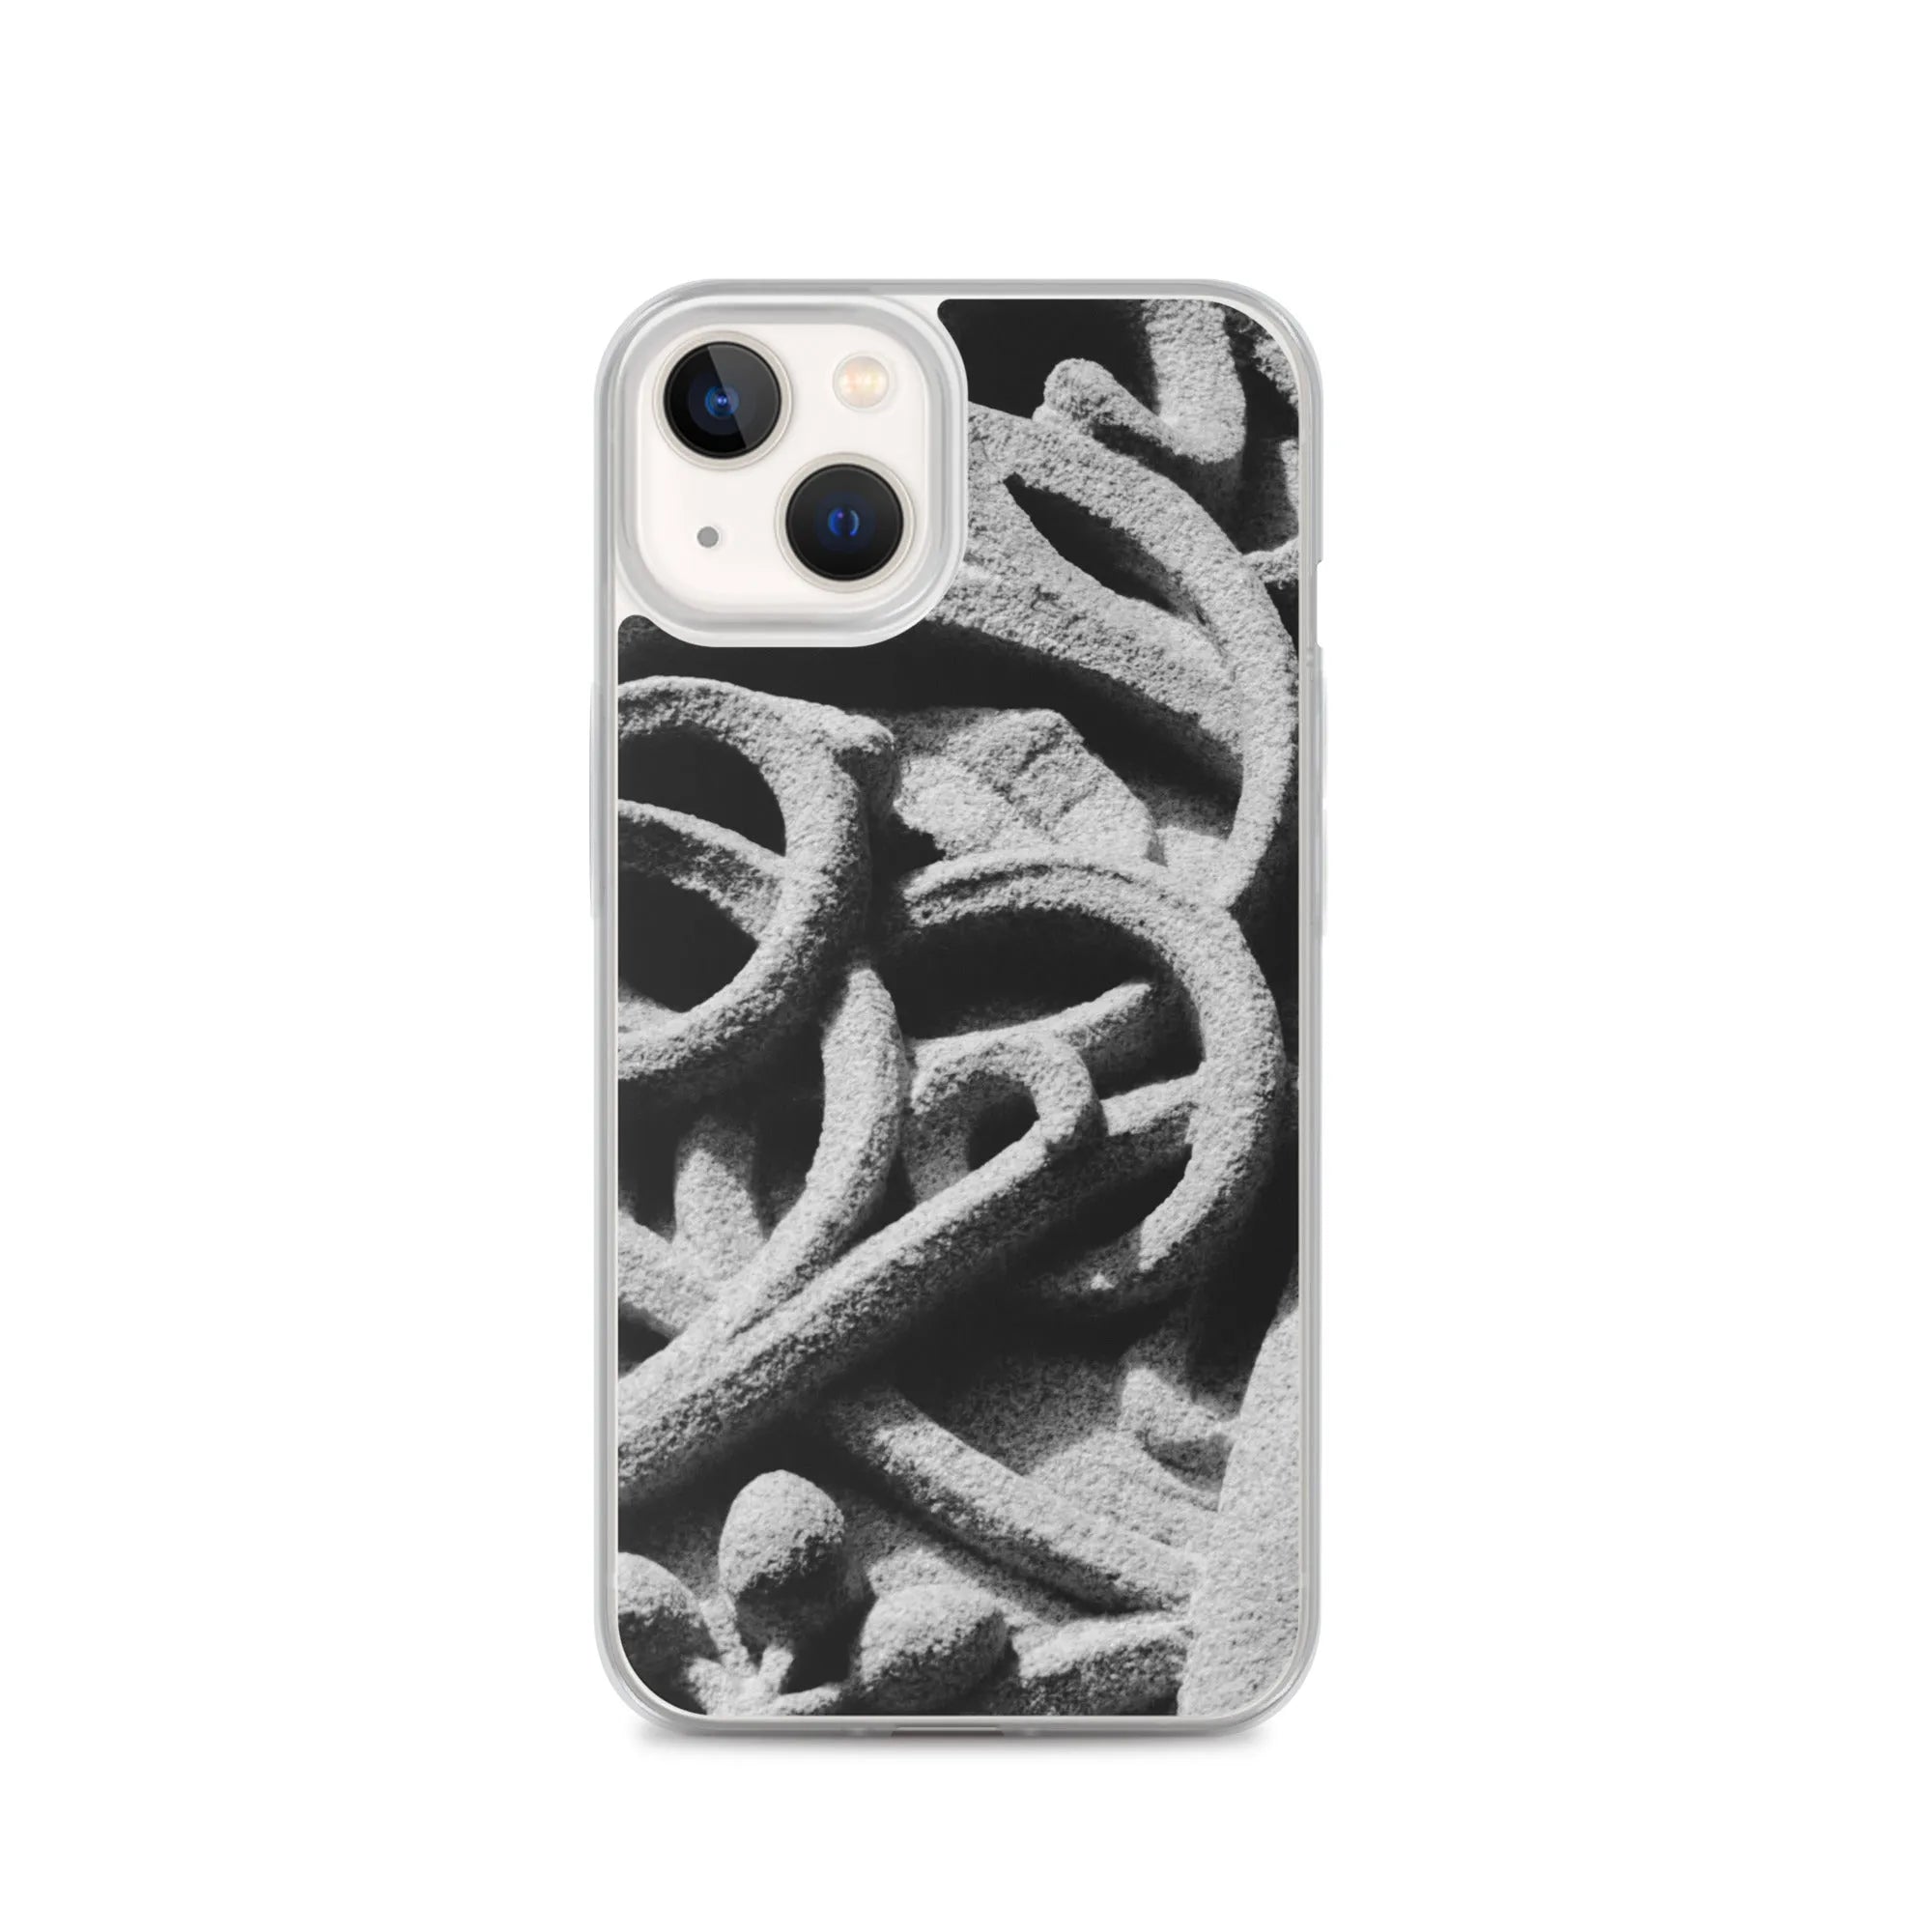 Labyrinth - Designer Travels Art Iphone Case - Black And White - Iphone 13 - Mobile Phone Cases - Aesthetic Art